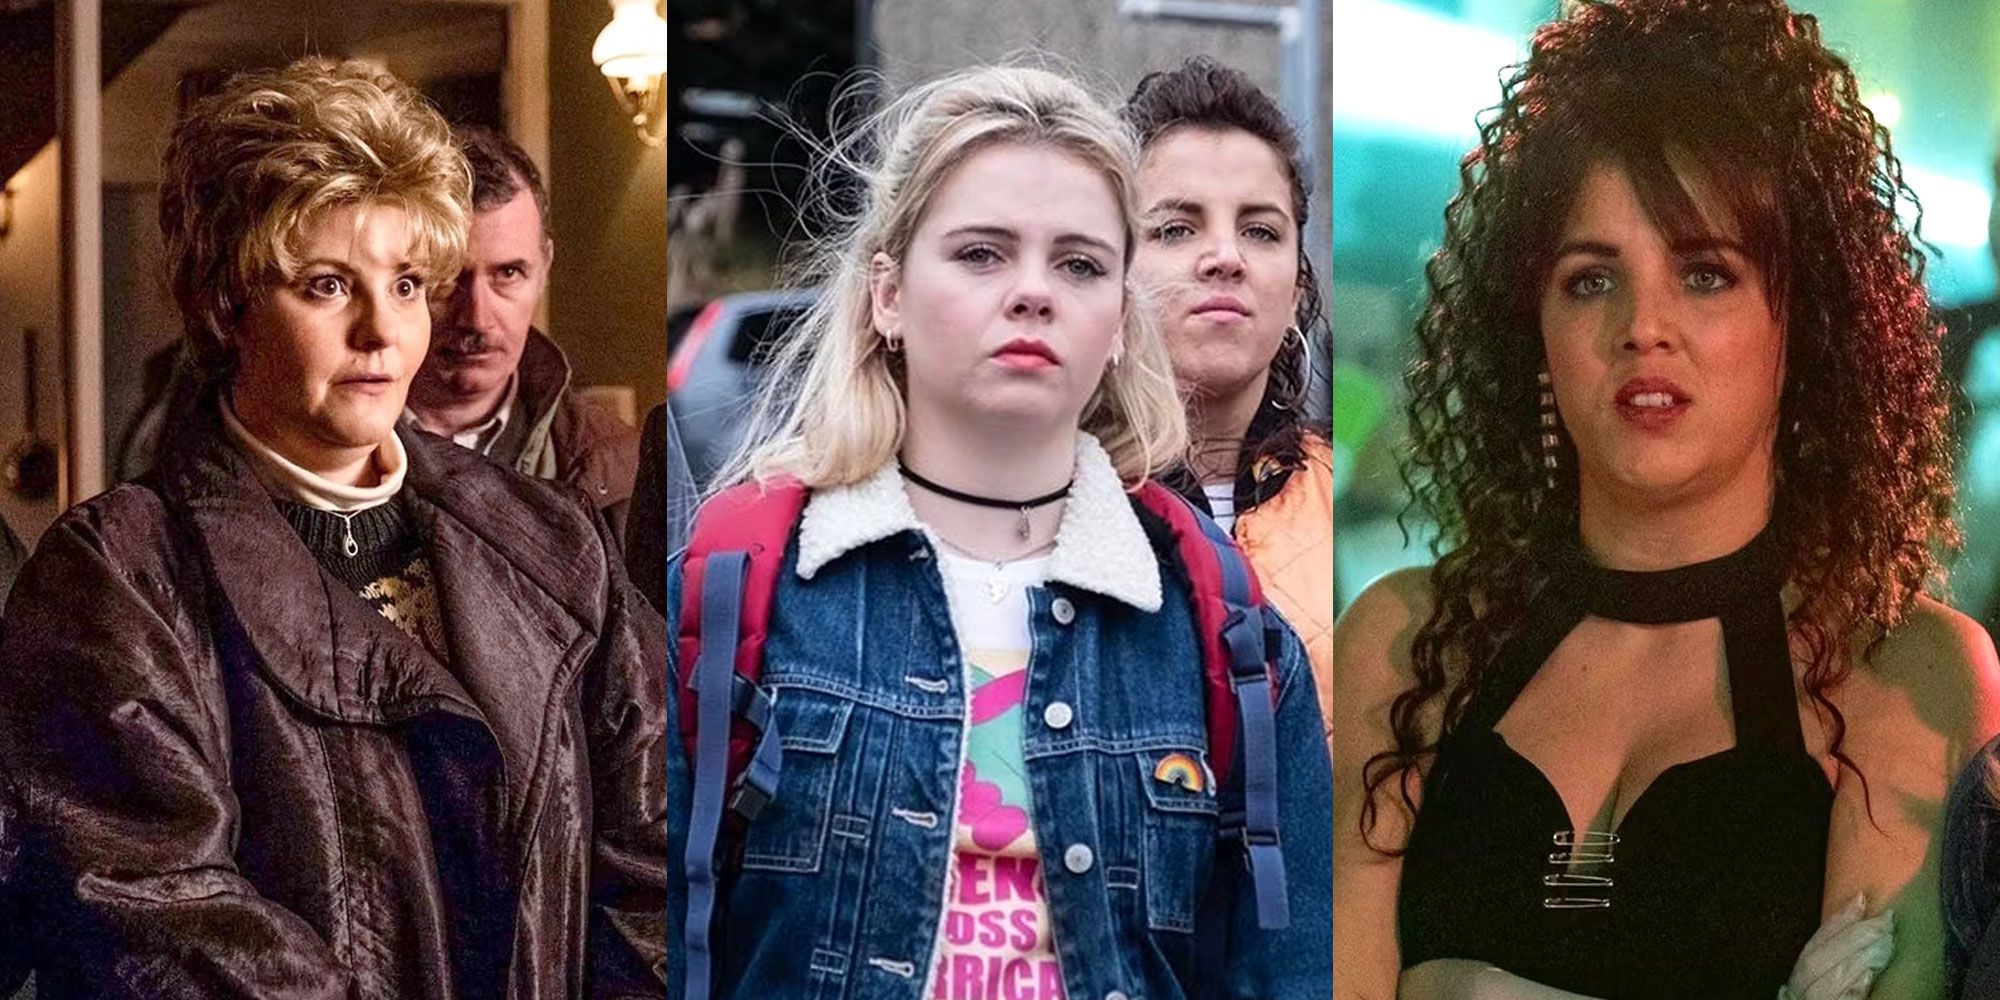 A split image features Mary, Erin, and Michelle in Derry Girls